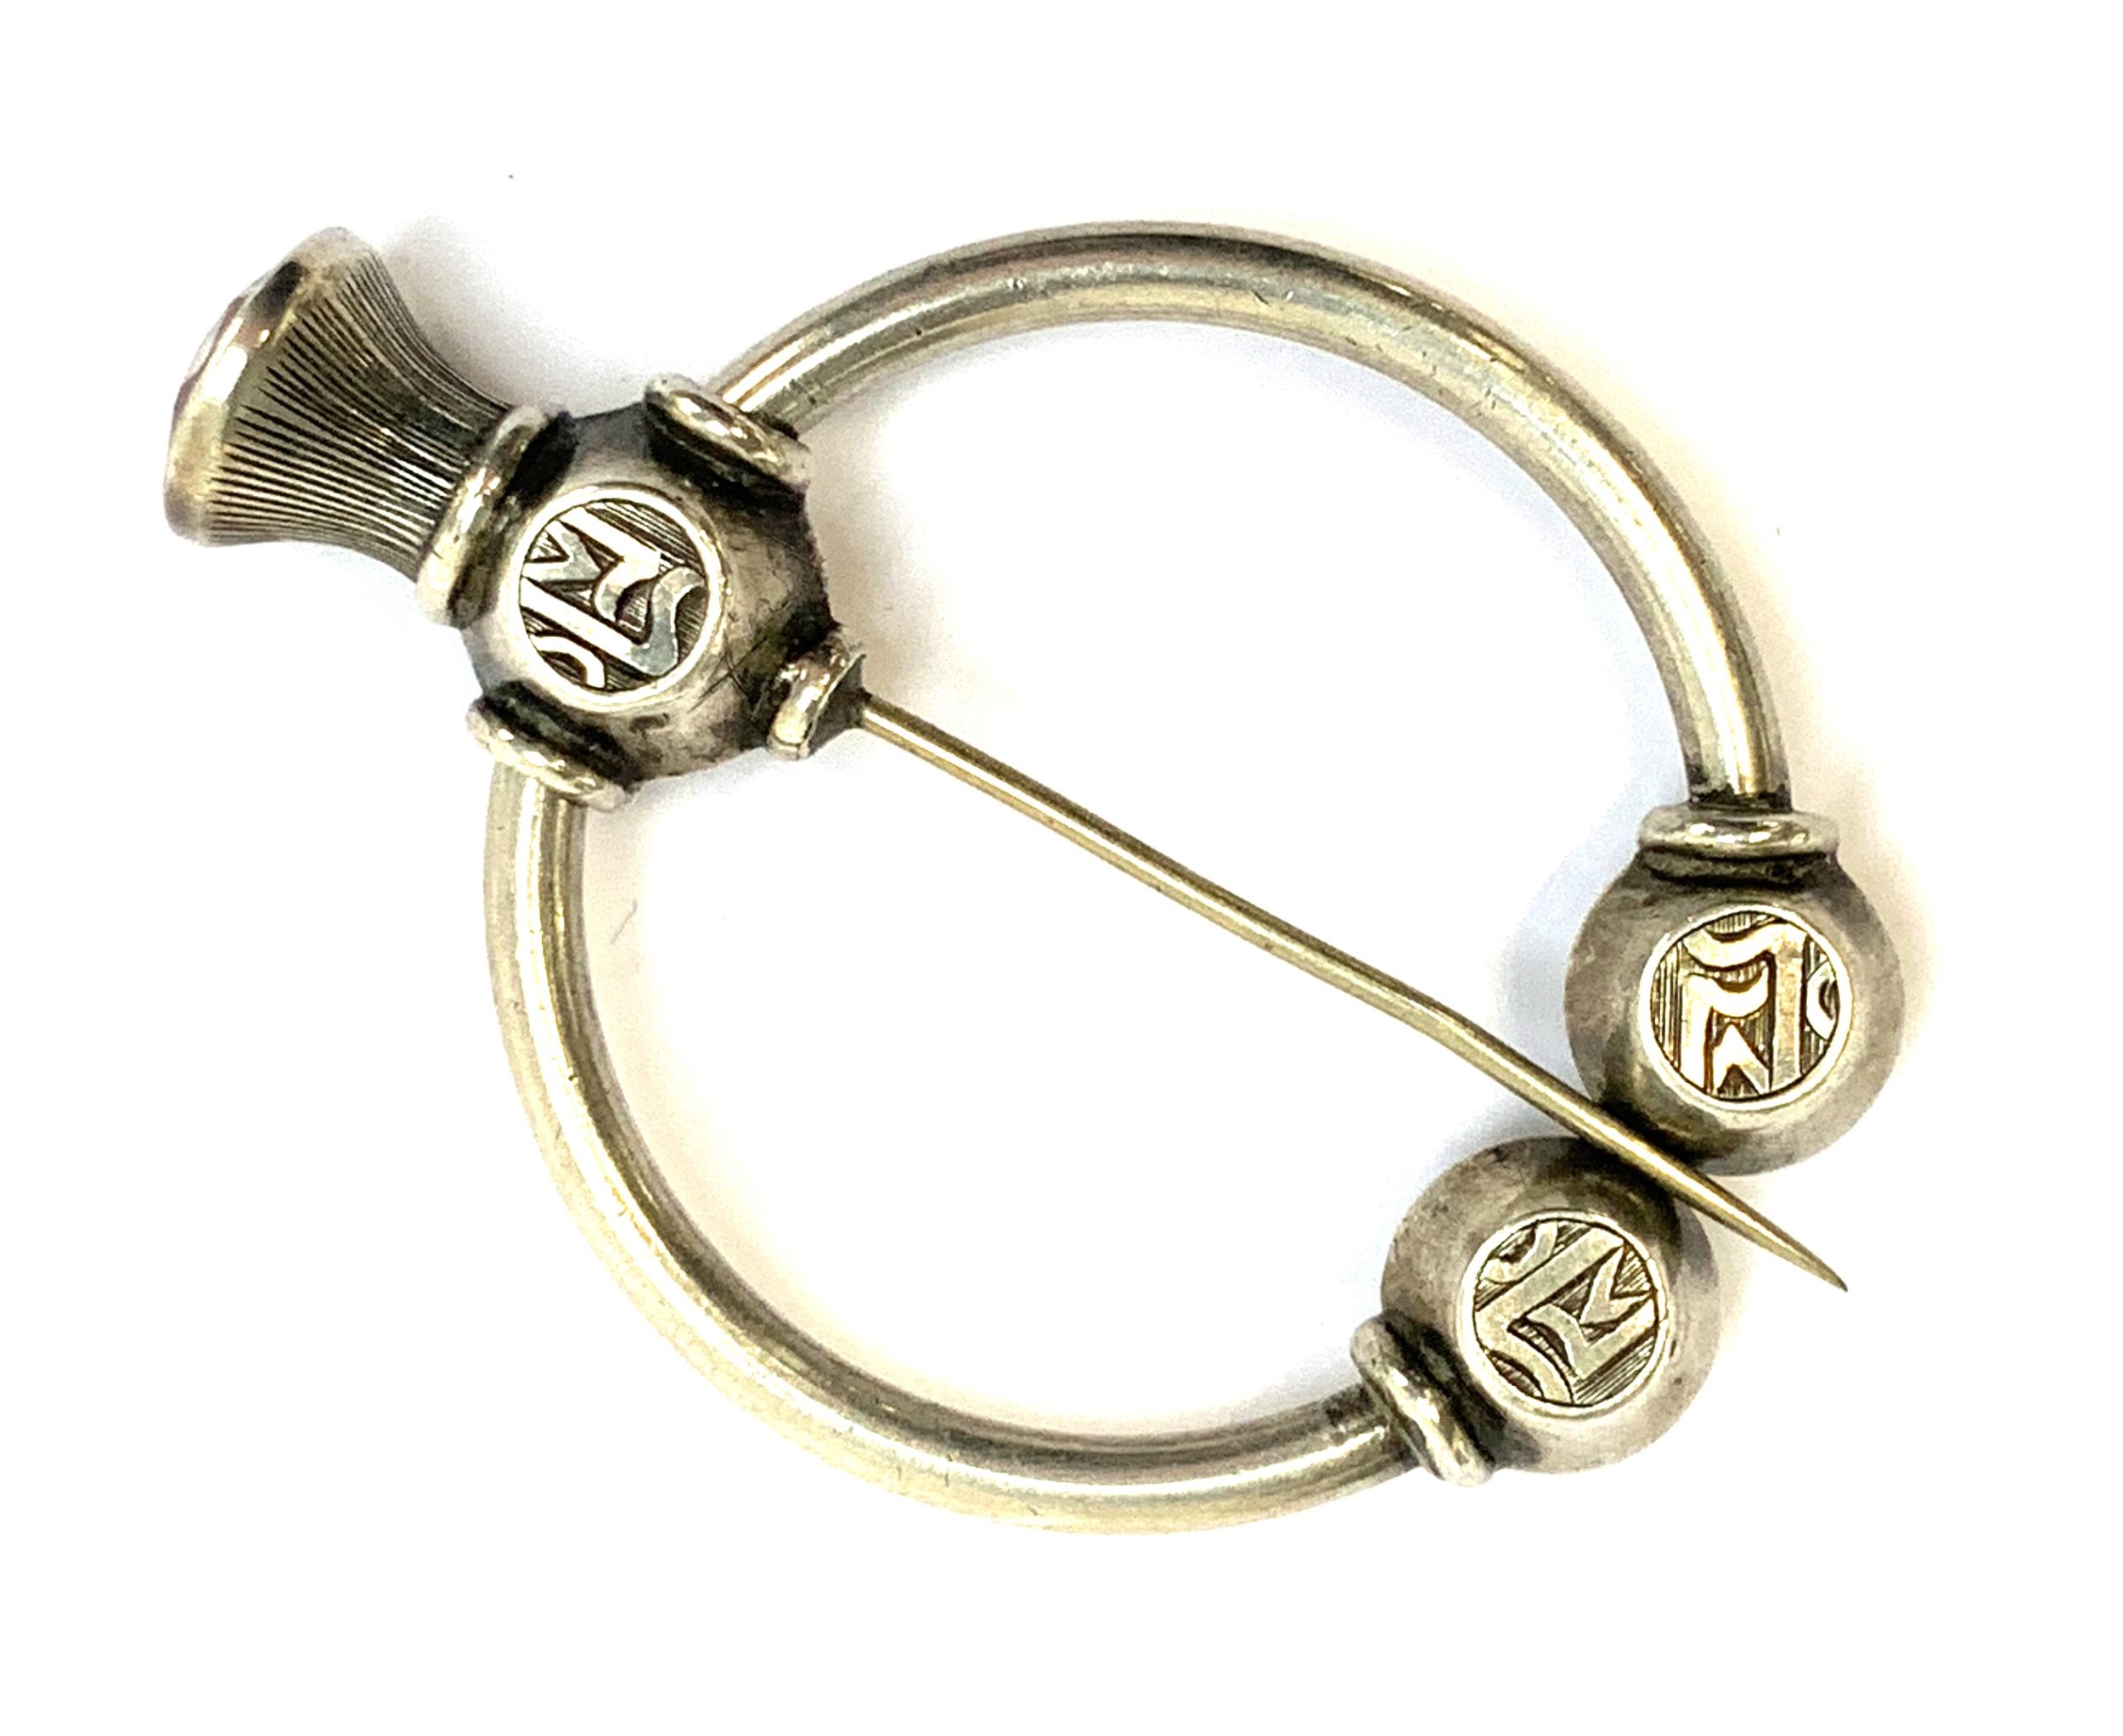 A Victorian silver Scottish penannular brooch set with foiled stones, with a thistle shaped pin - Image 2 of 3